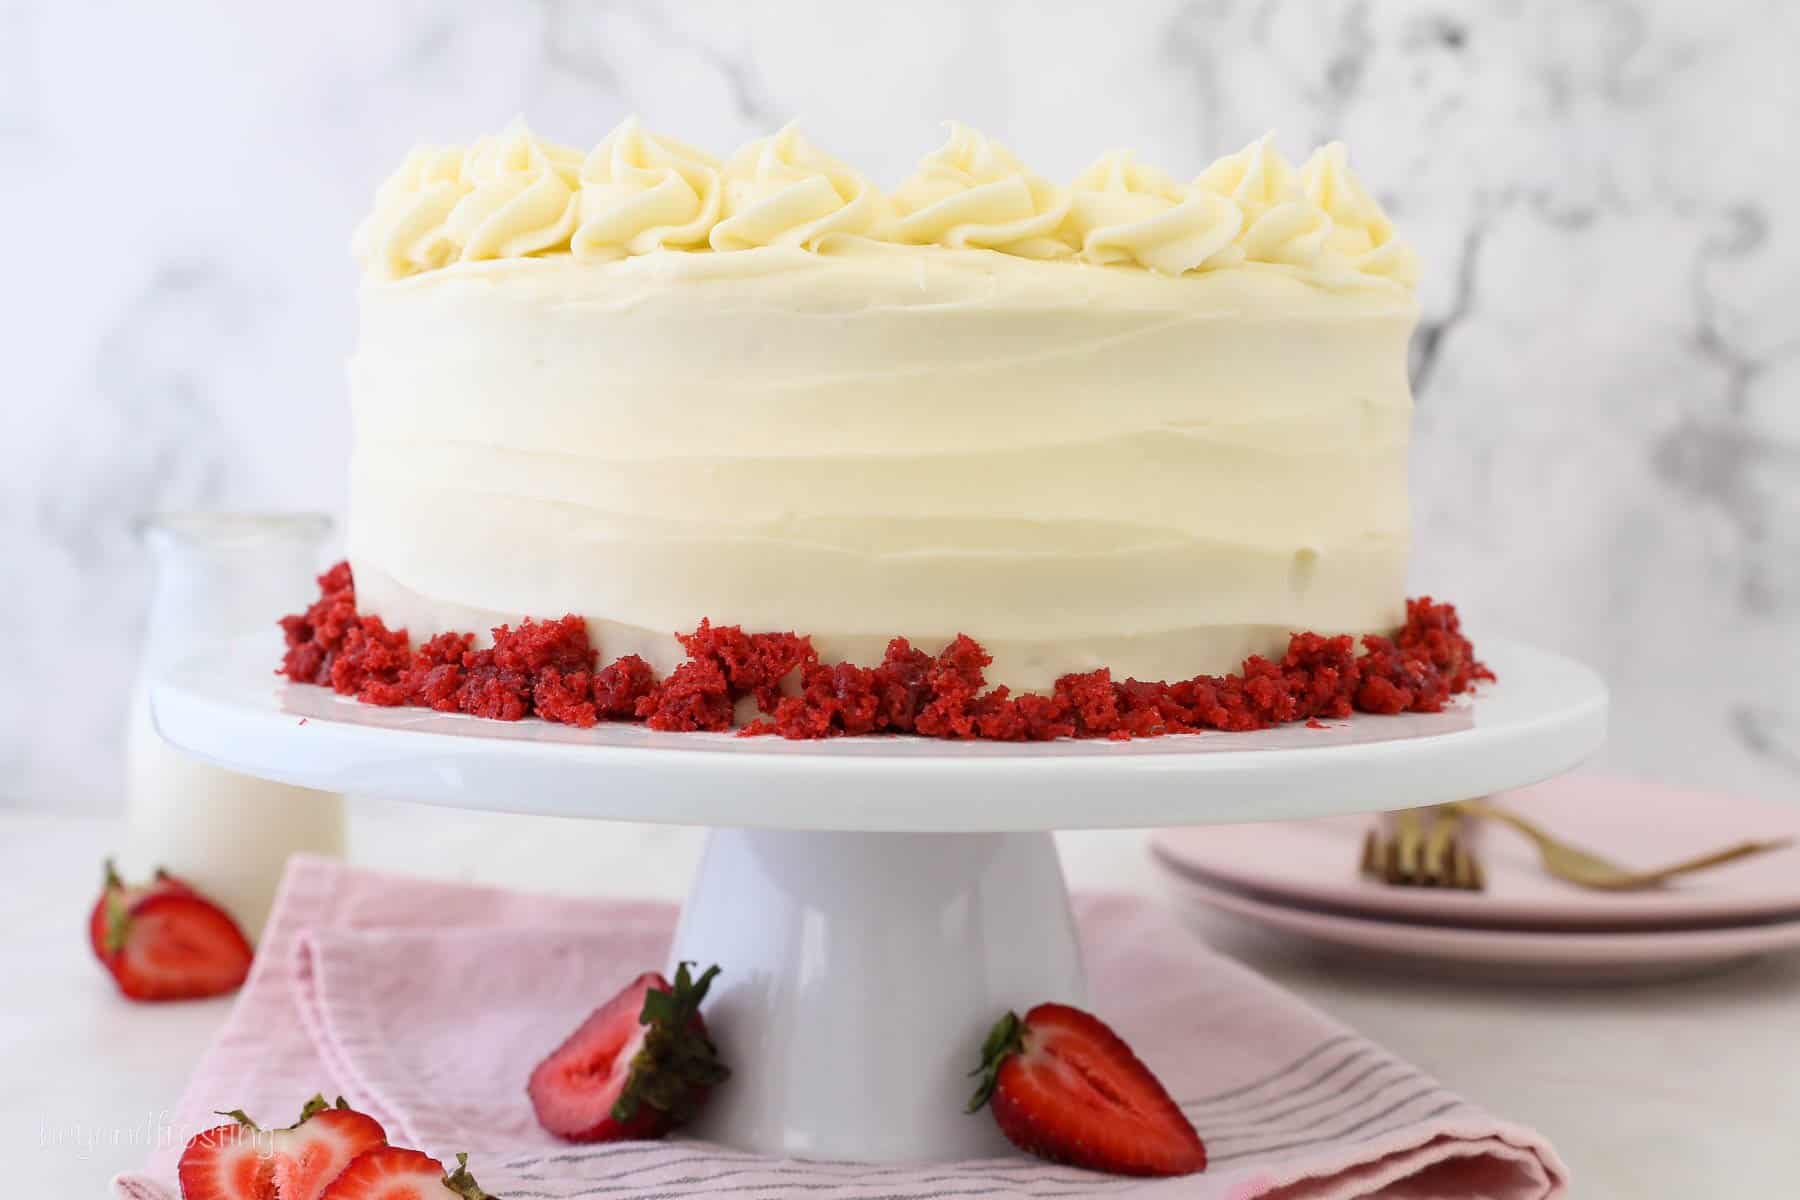 Gluten-free red velvet cake with cream cheese frosting on a cake stand